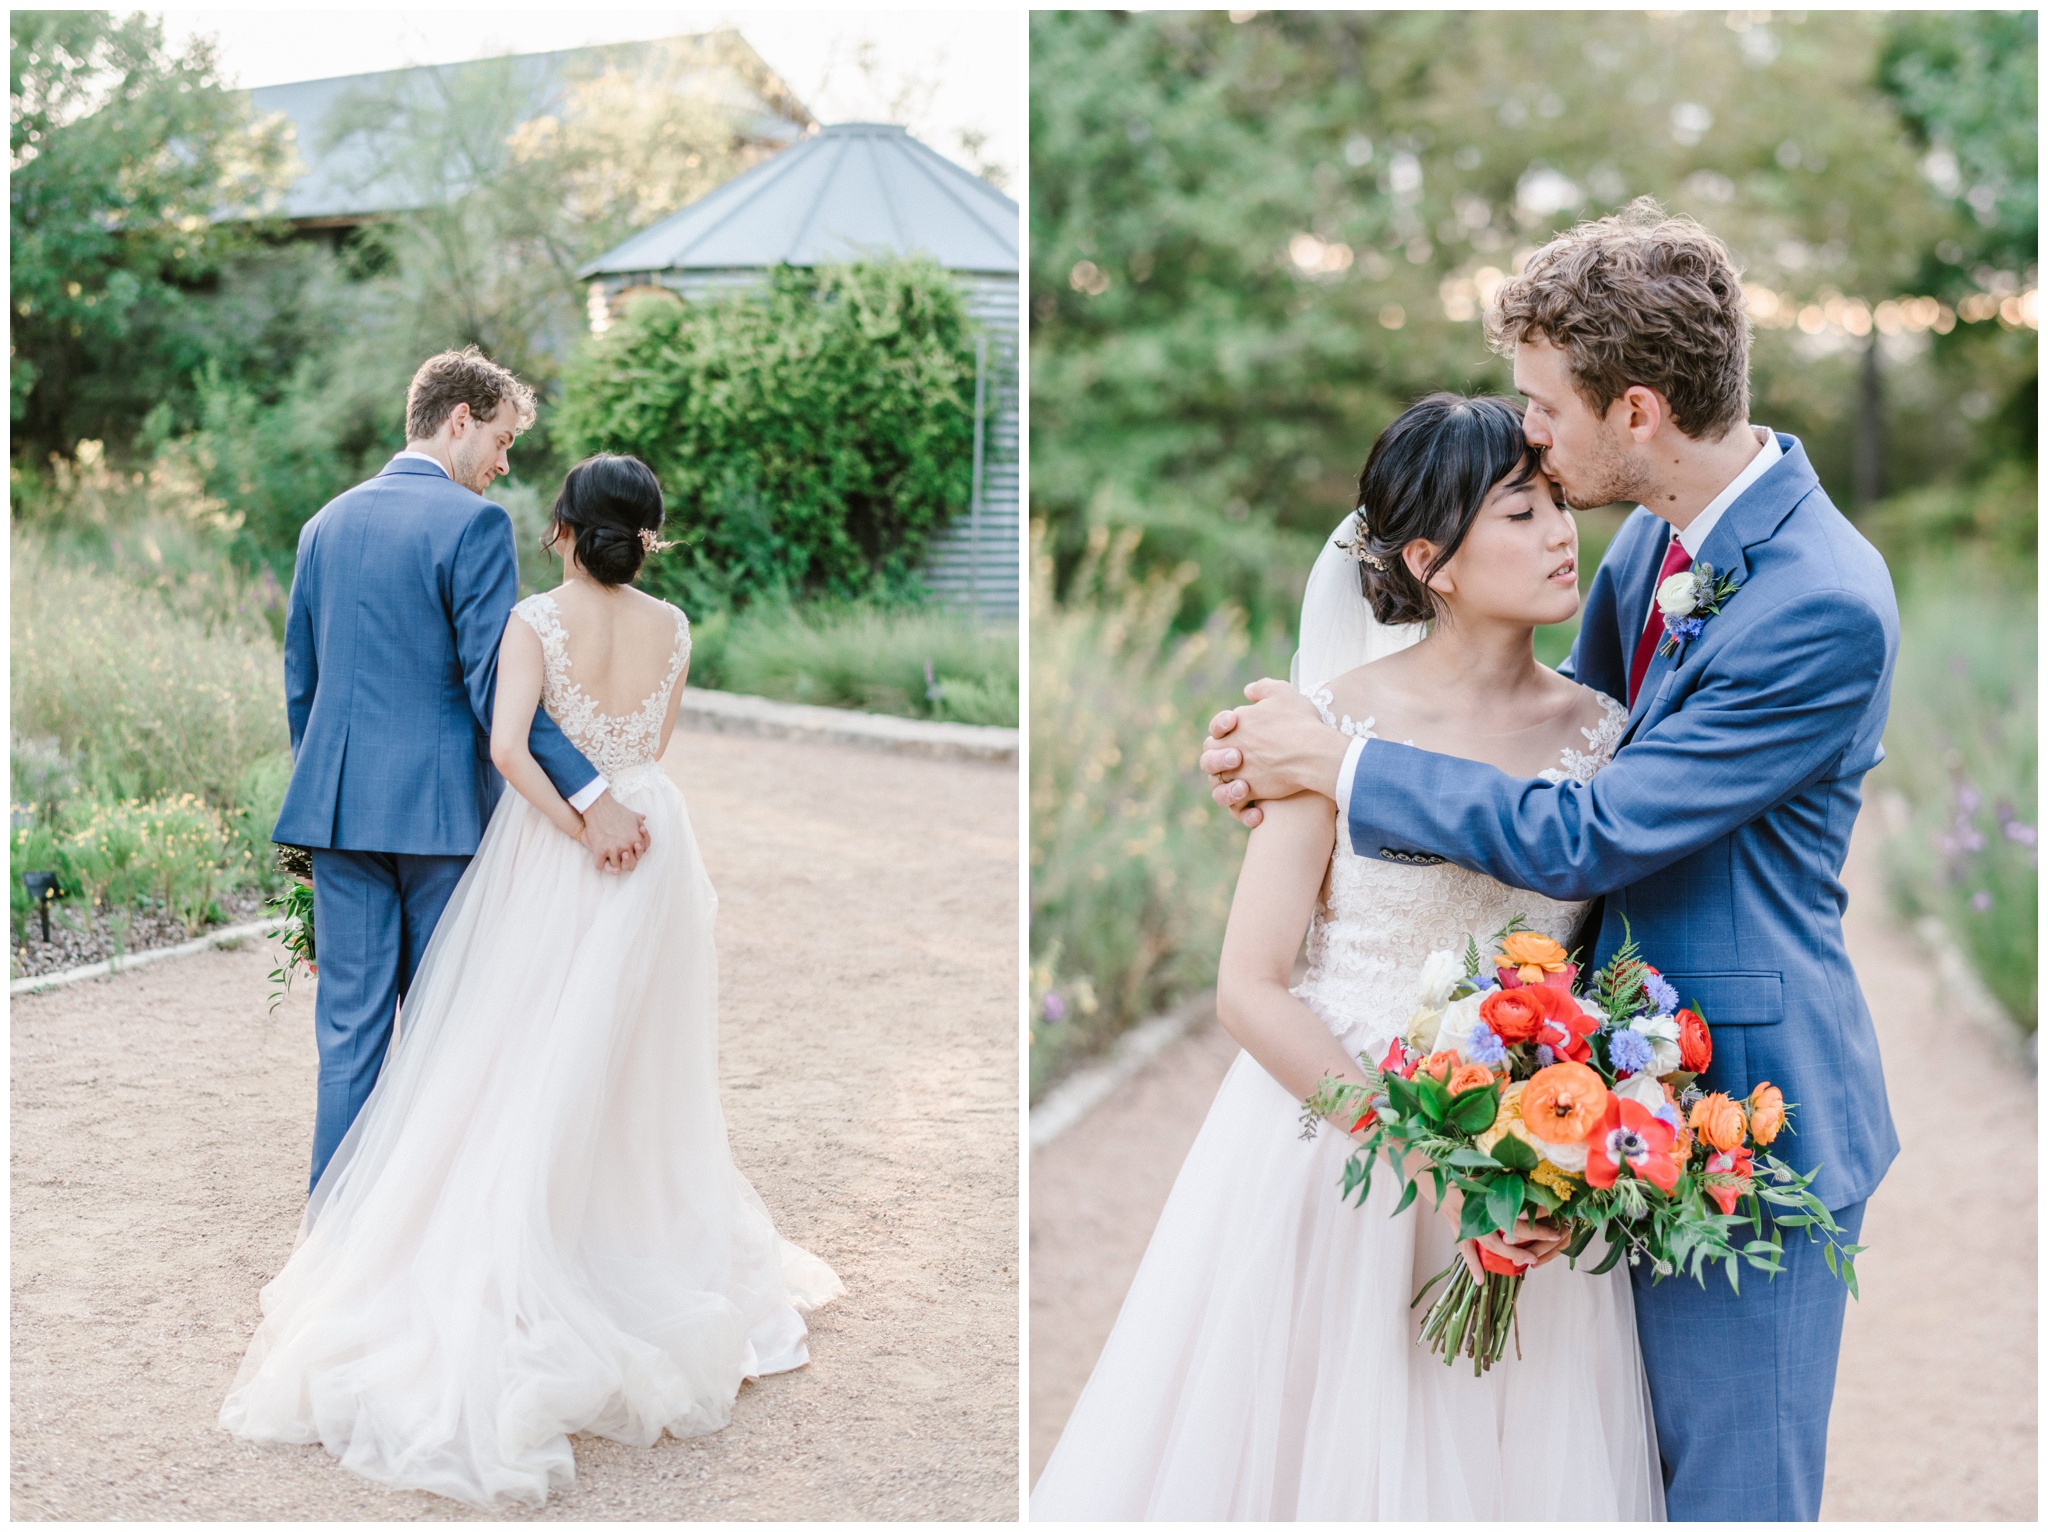 Light and airy wedding photography, groom in navy suit, red bridal bouquet, Joslyn Holtfort Photography